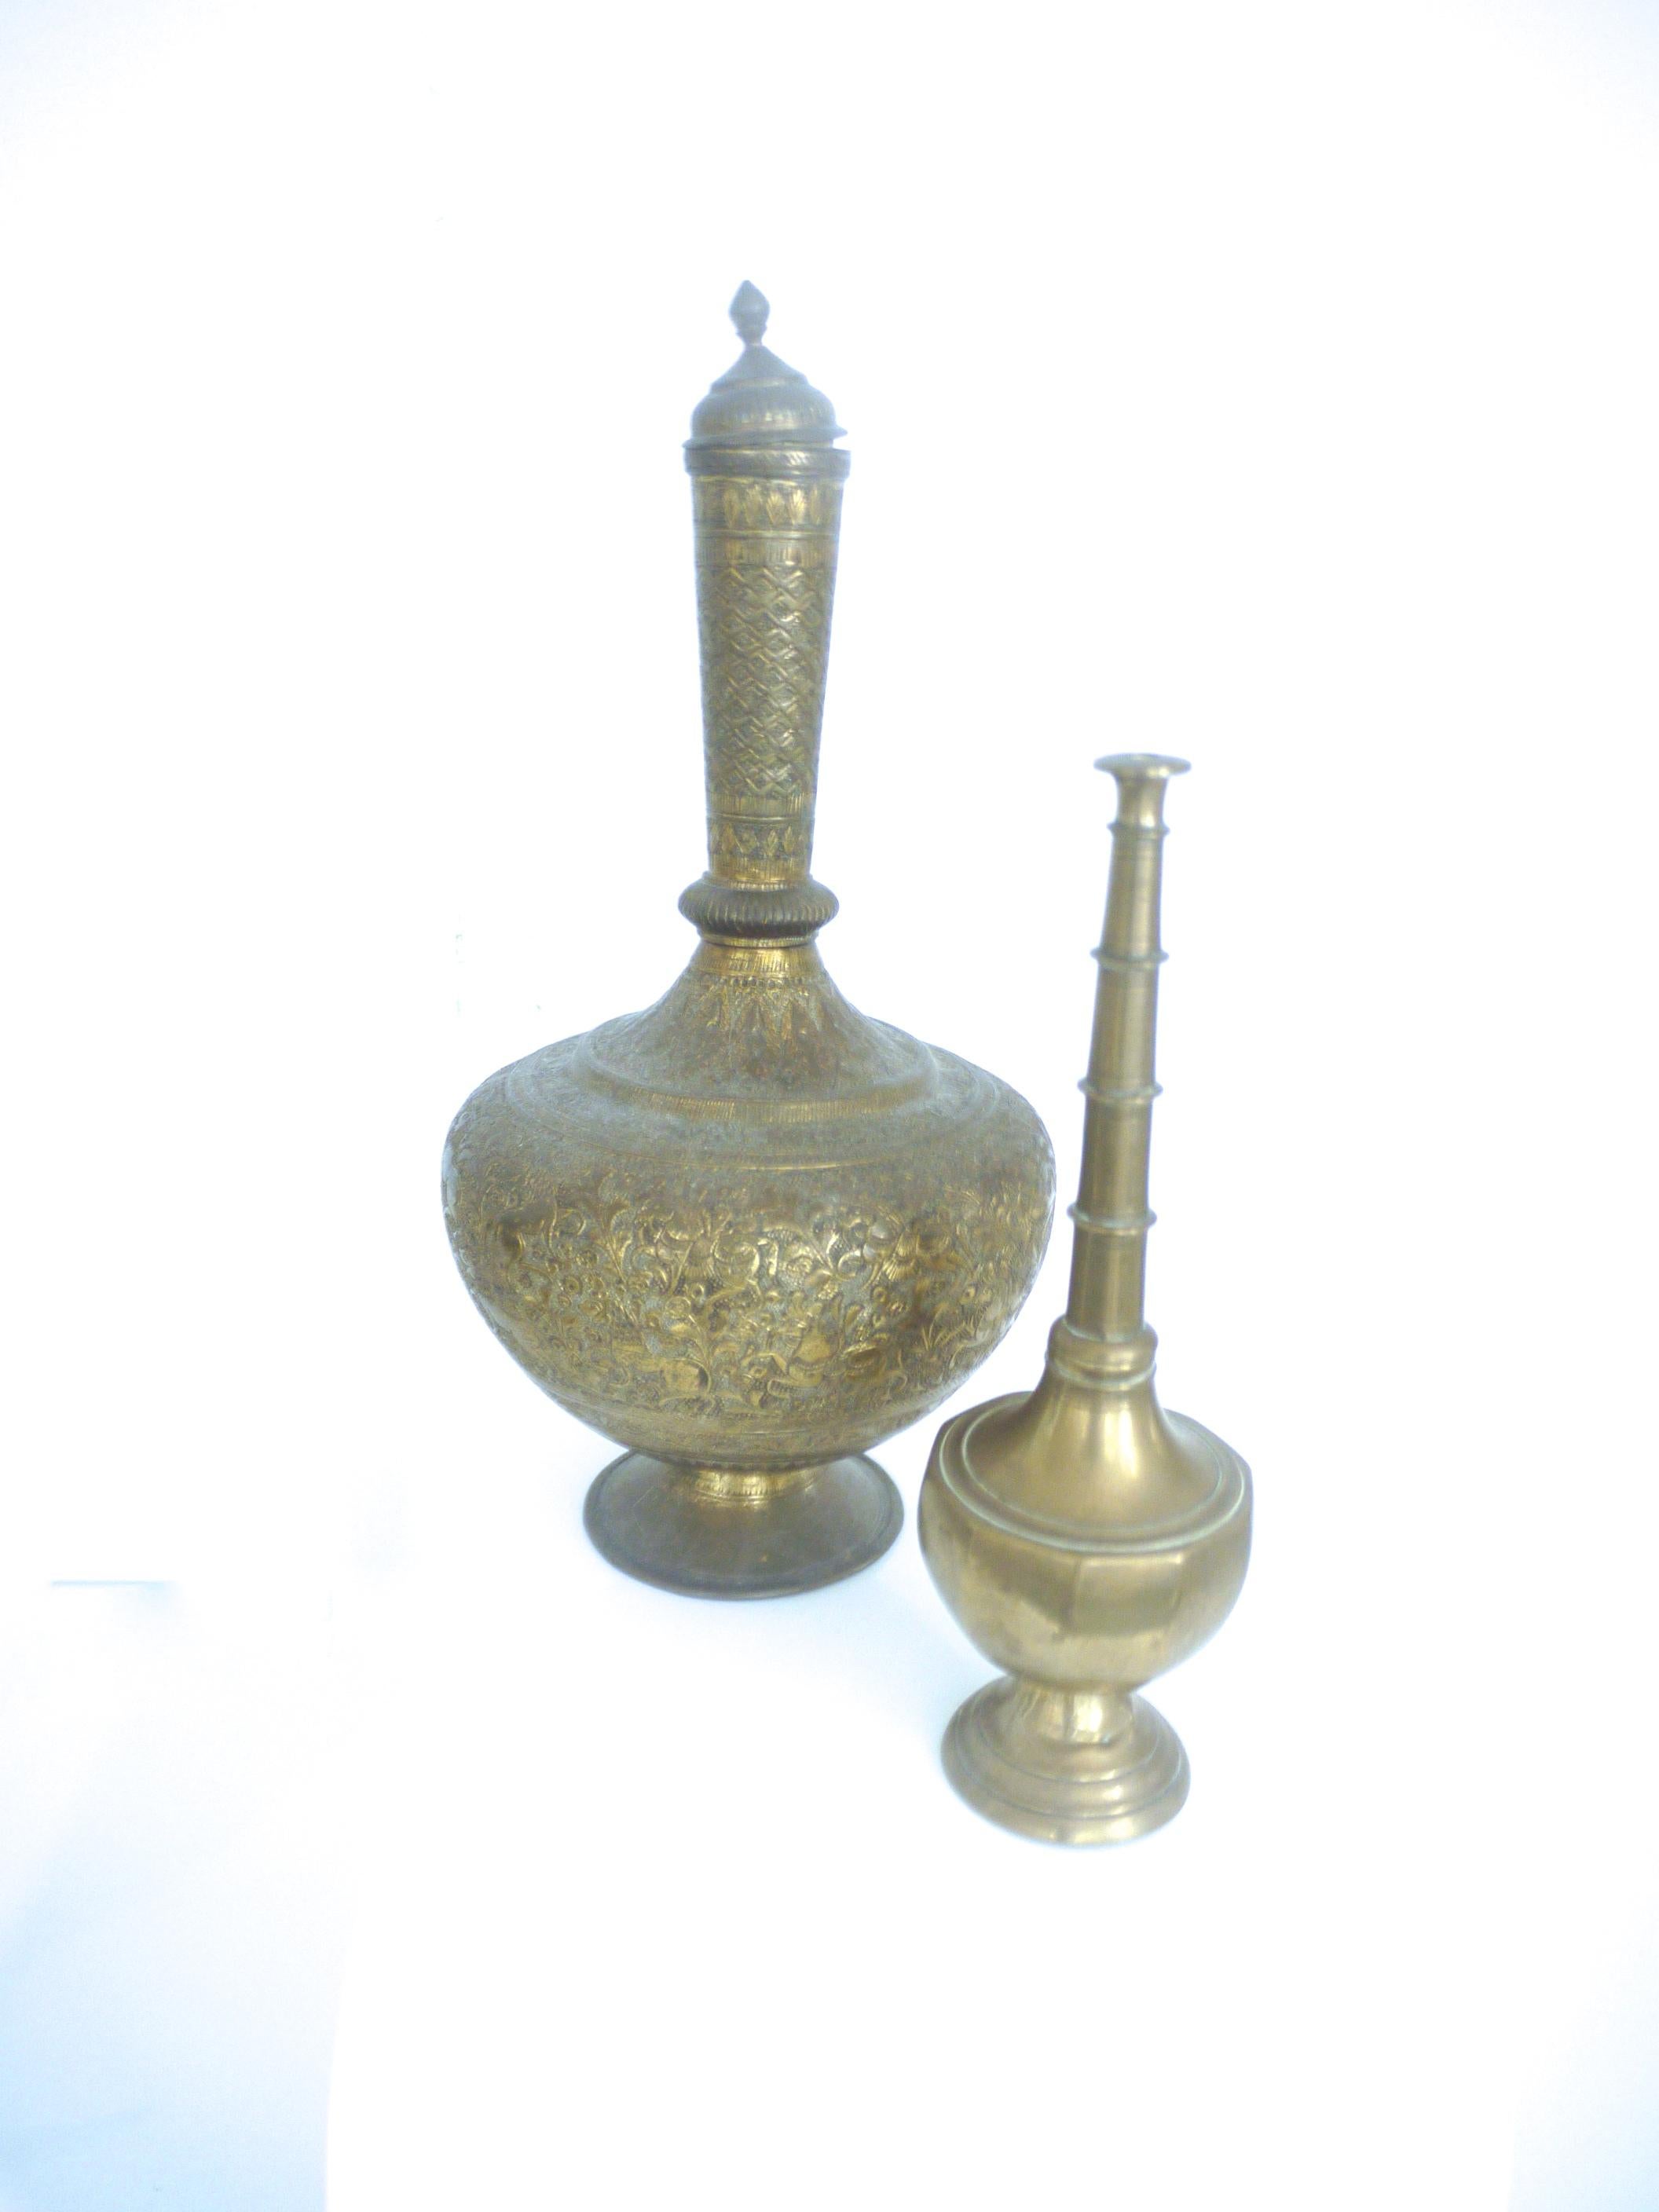 20th century Middle Eastern/North African large incense burner paired with a Rosewater Sprinkler.

We have several small collections/pairs in this genre suitable for a larger collection- offers welcome.

Large brass incense burner

Height 28